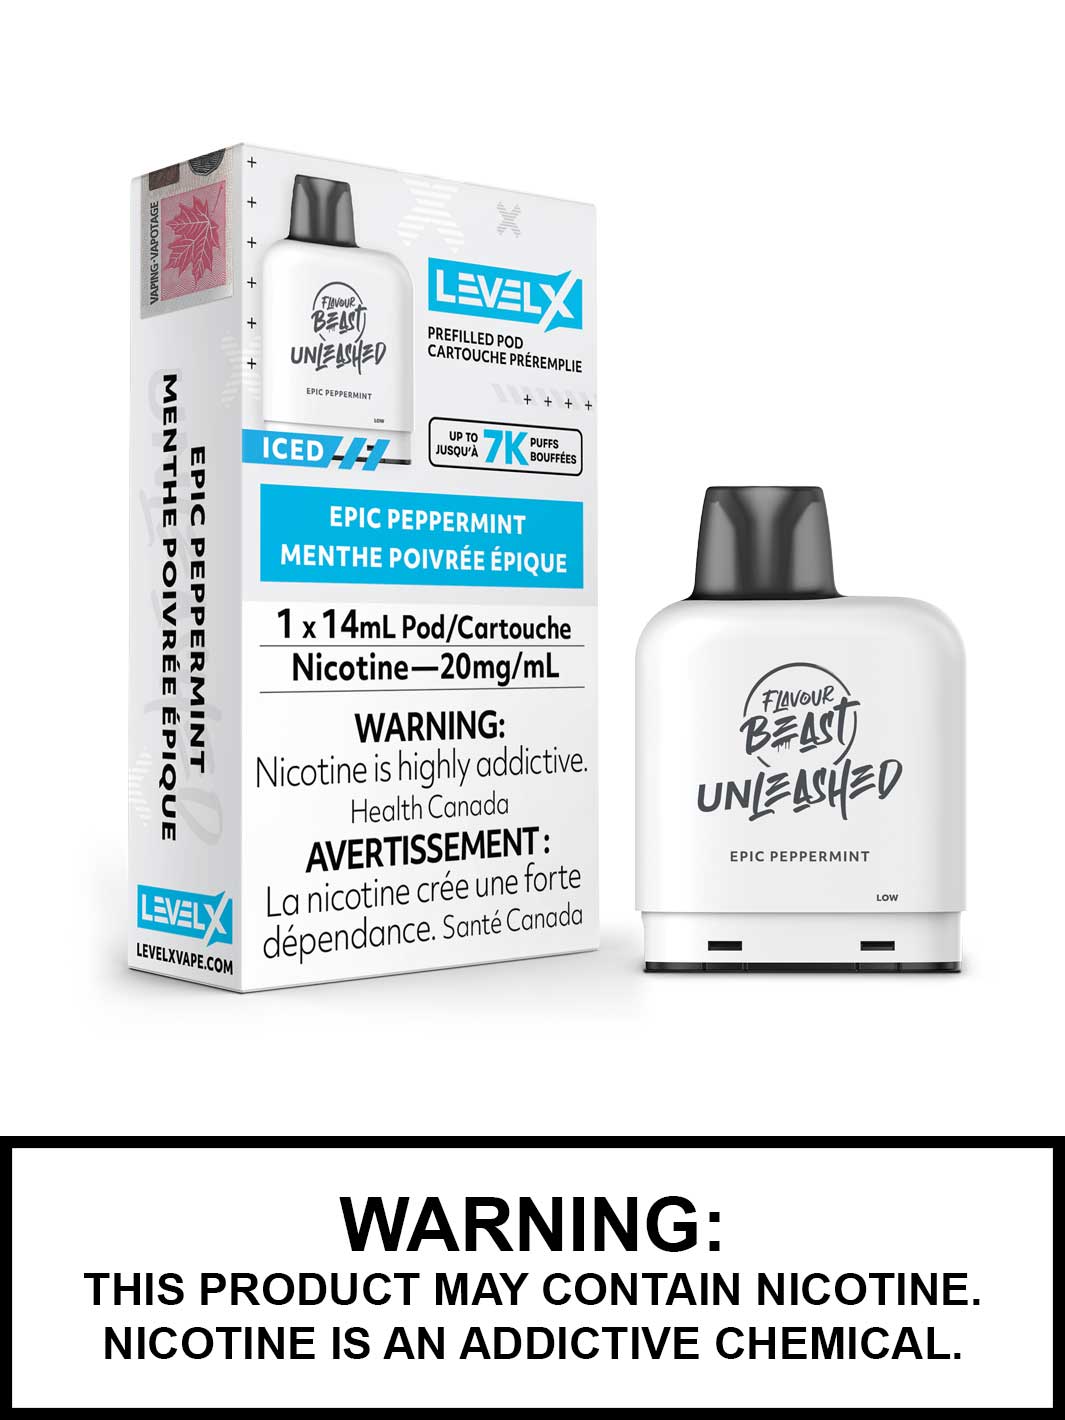 Epic Peppermint Iced Level X Flavour Beast Unleashed Pods, Vape360 Canada